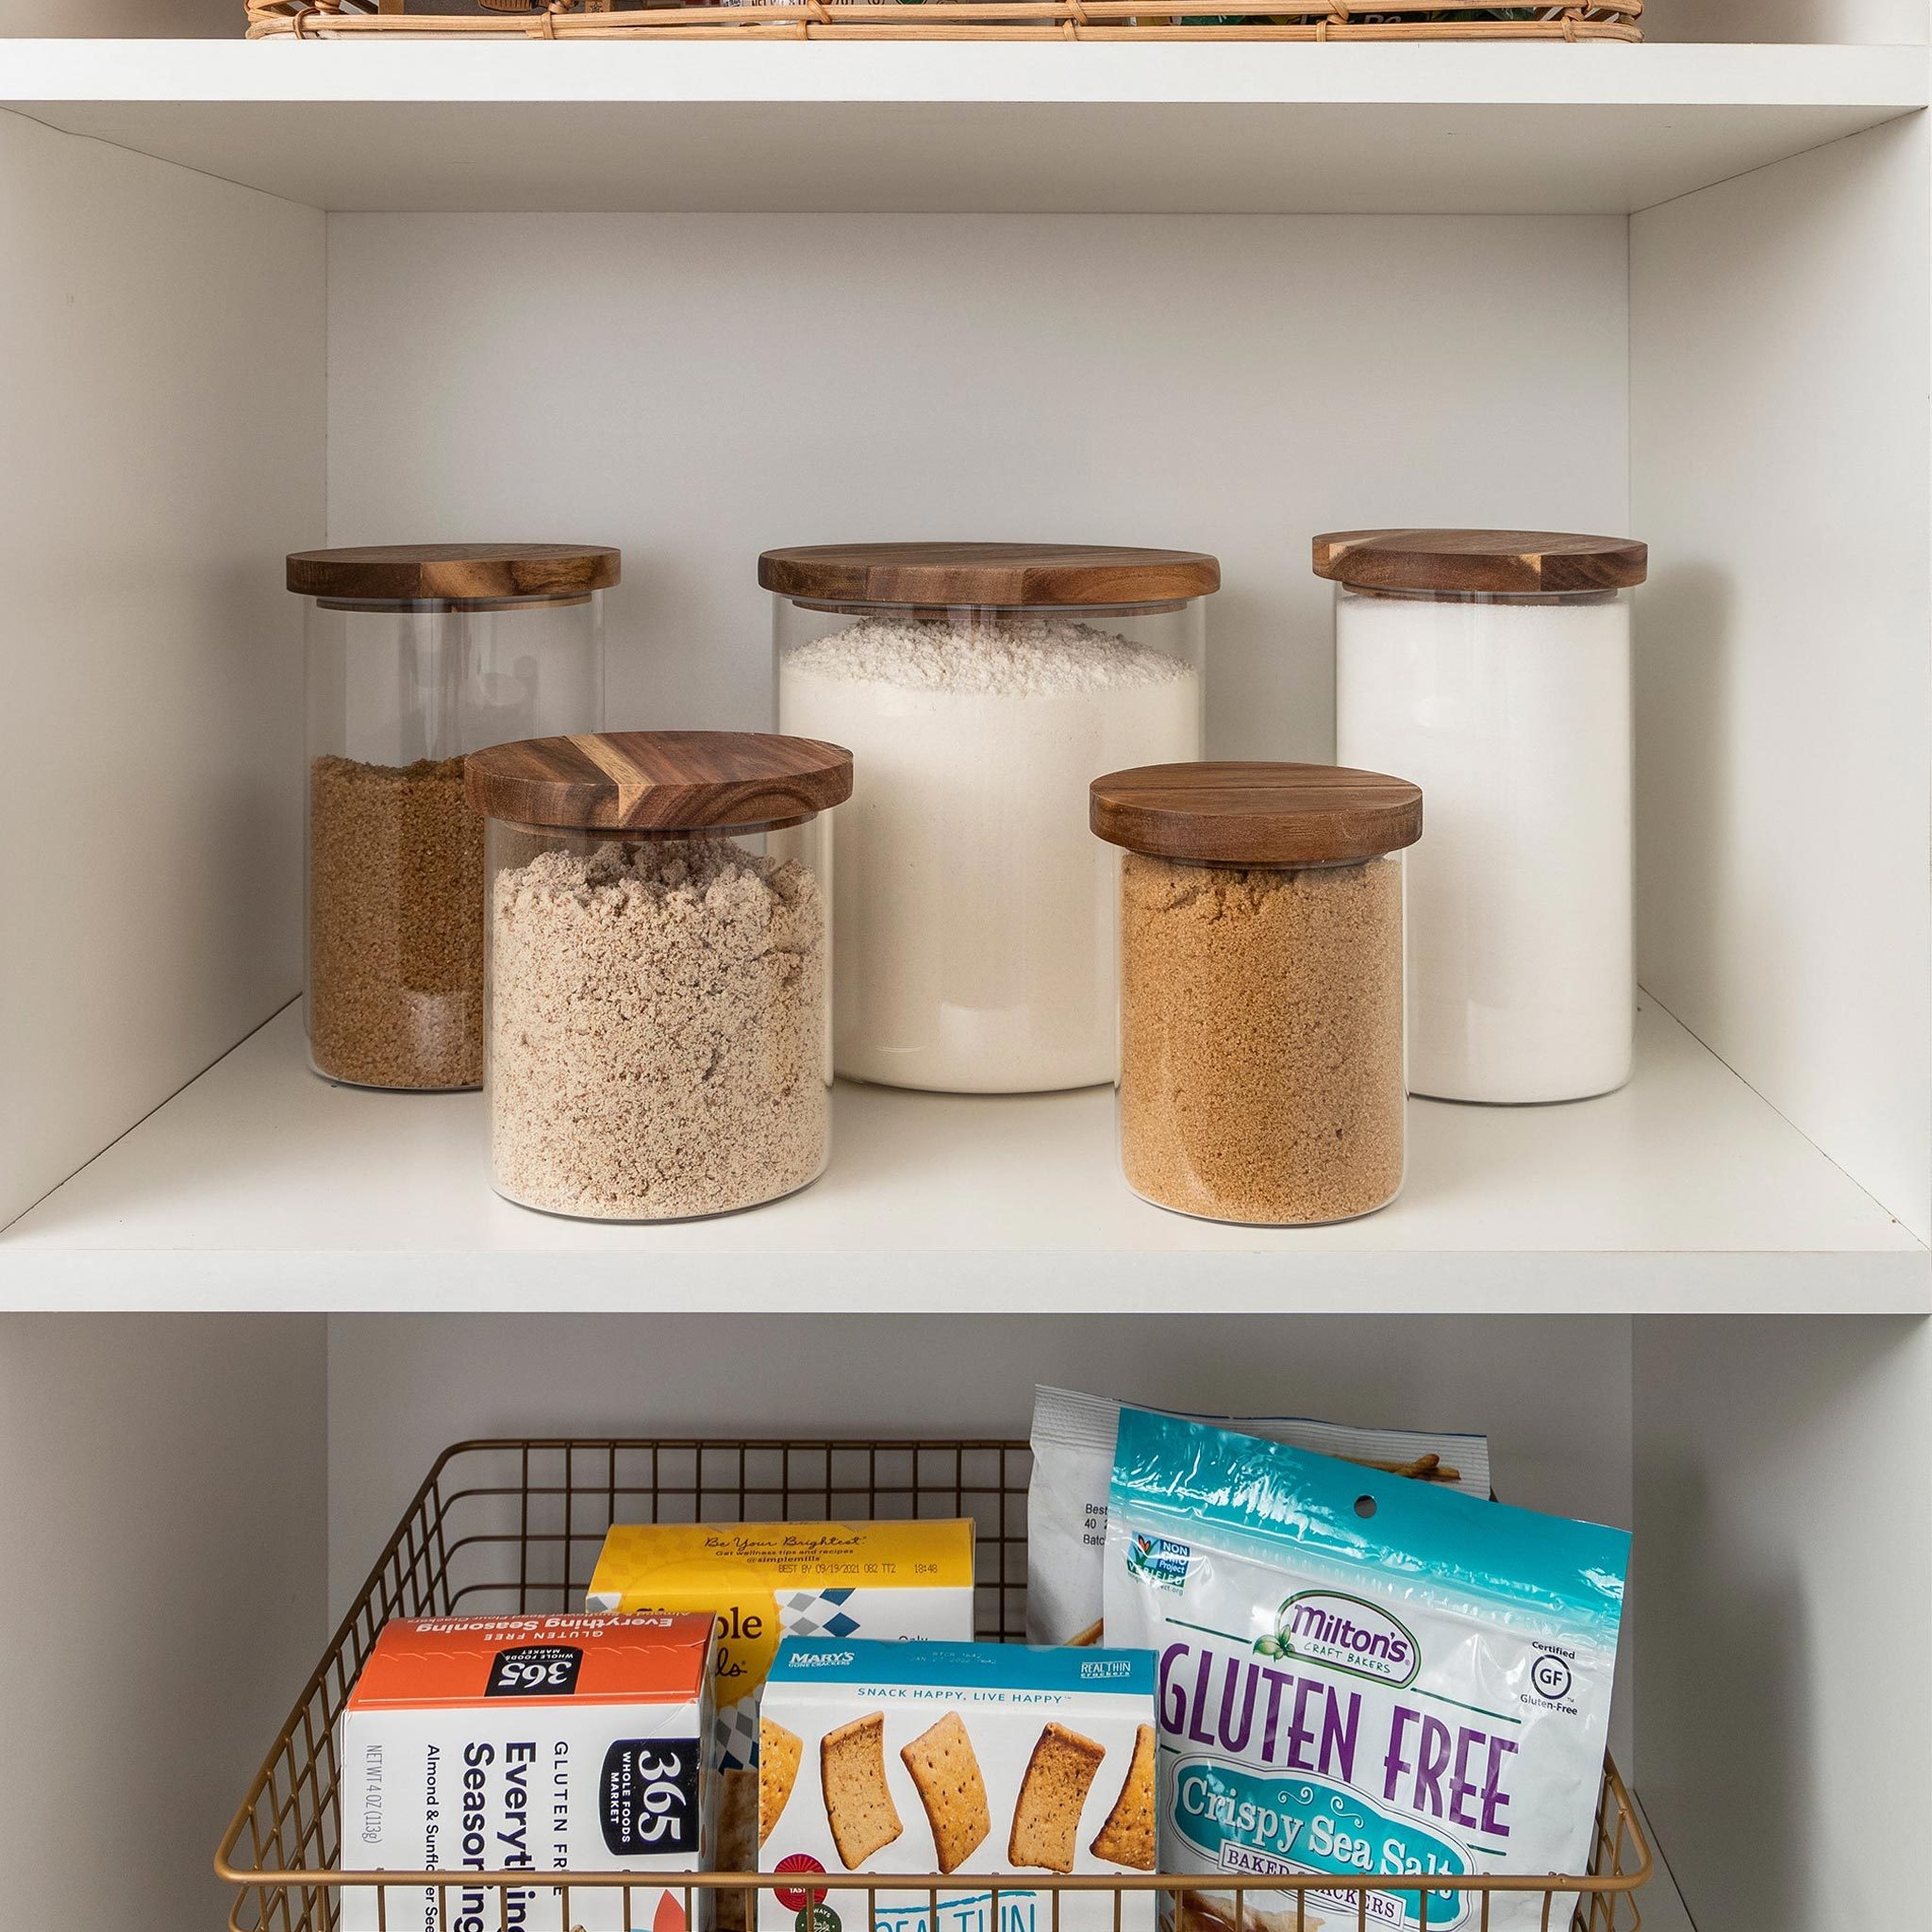 Best Pantry Storage Containers and Organizers for Food - Caitlin